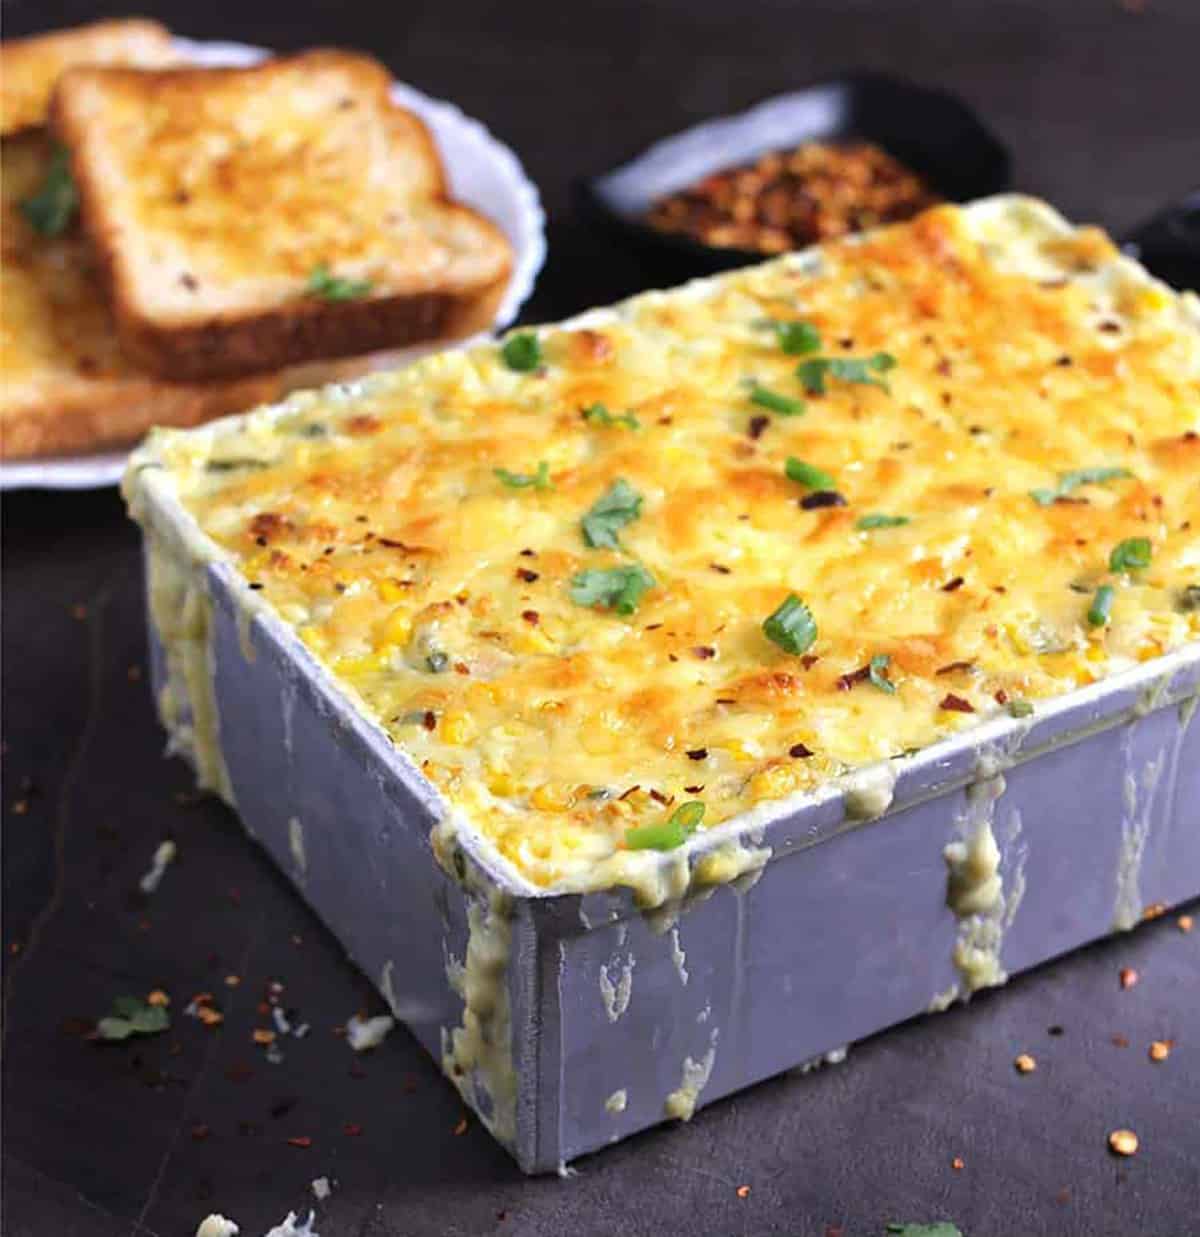 cheesy corn casserole with bubbly cheese topping right out of the oven.